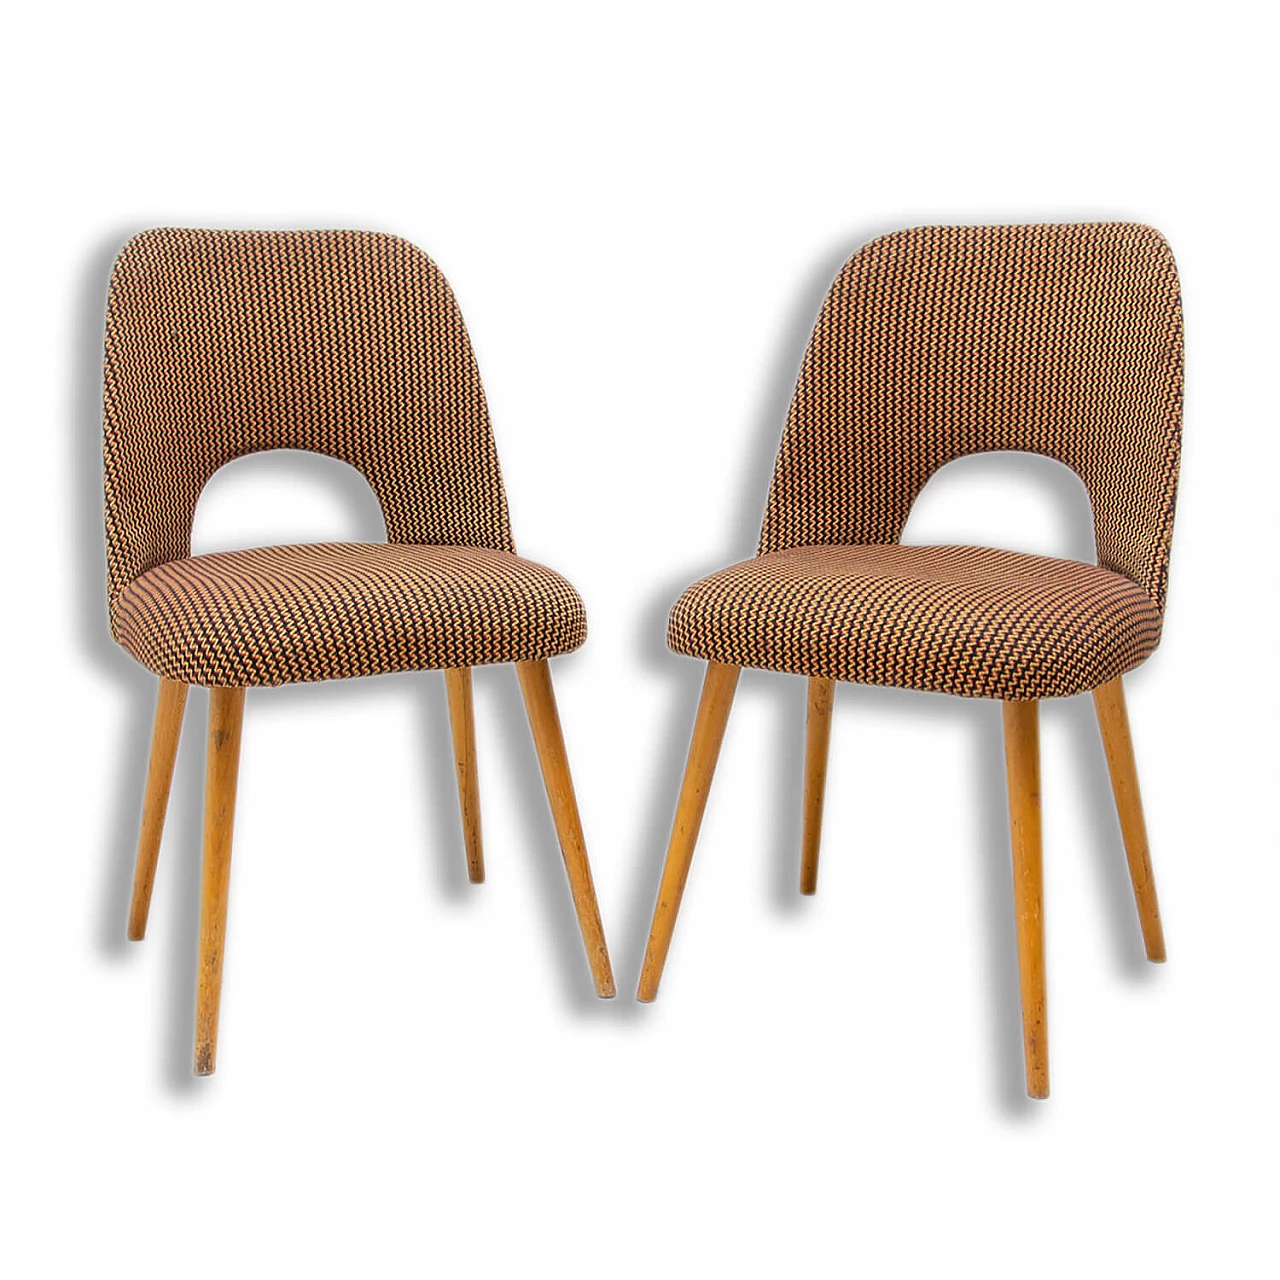 Pair of upholstered bentwood chairs by Radomír Hofman for Ton, 1960s 1